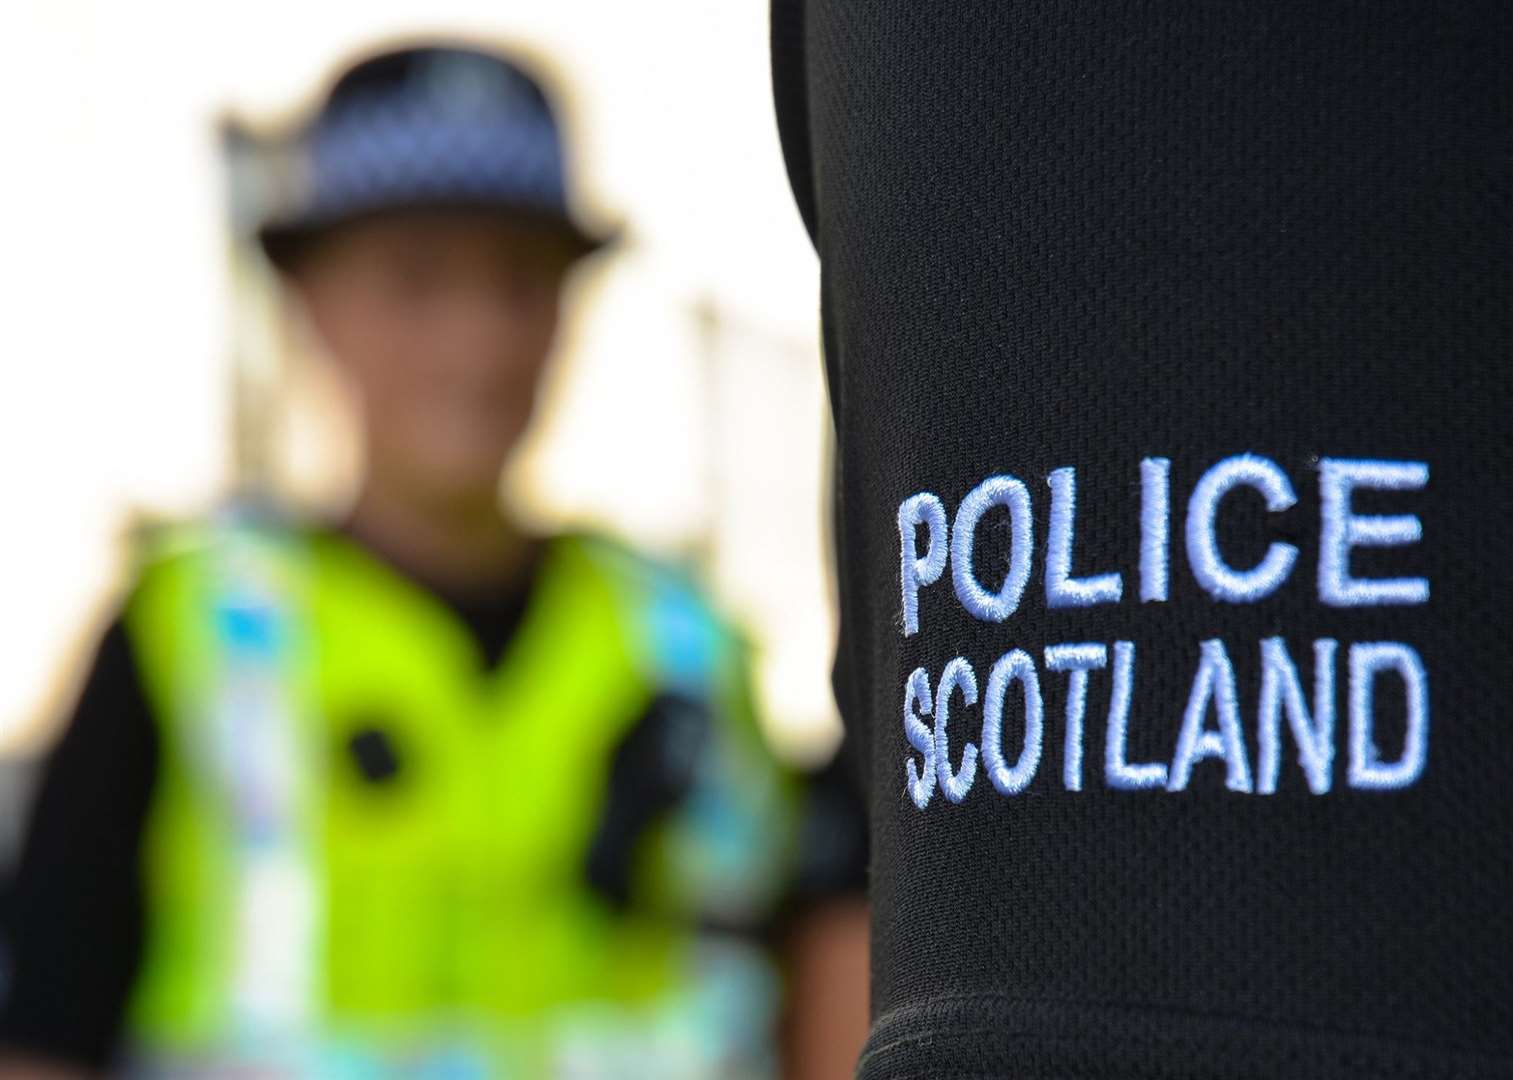 Police Scotland made arrests after executing a drug search warrant.